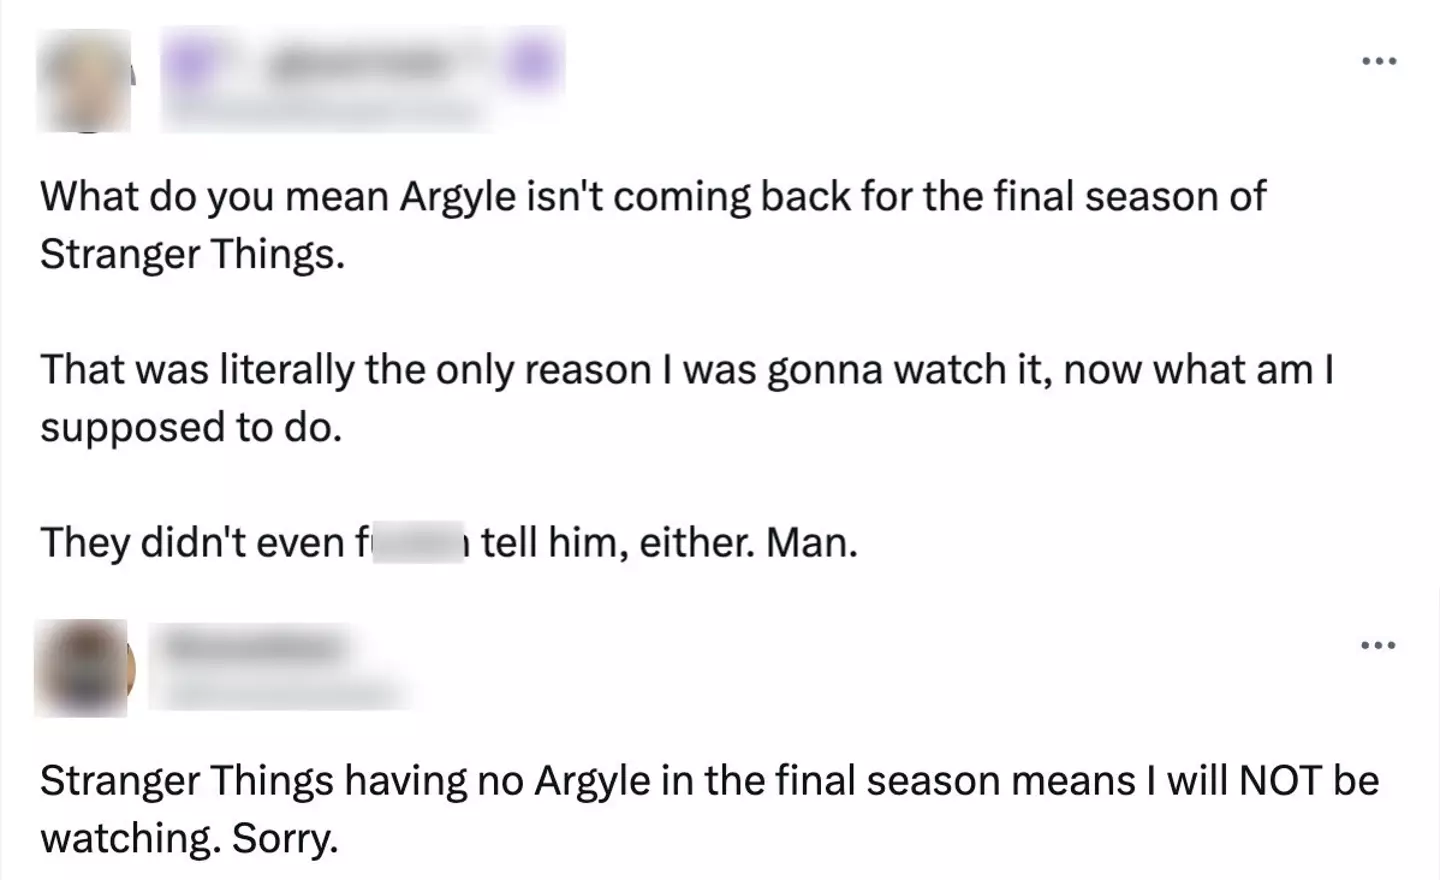 Stranger Things fans have vowed not to watch the final season.